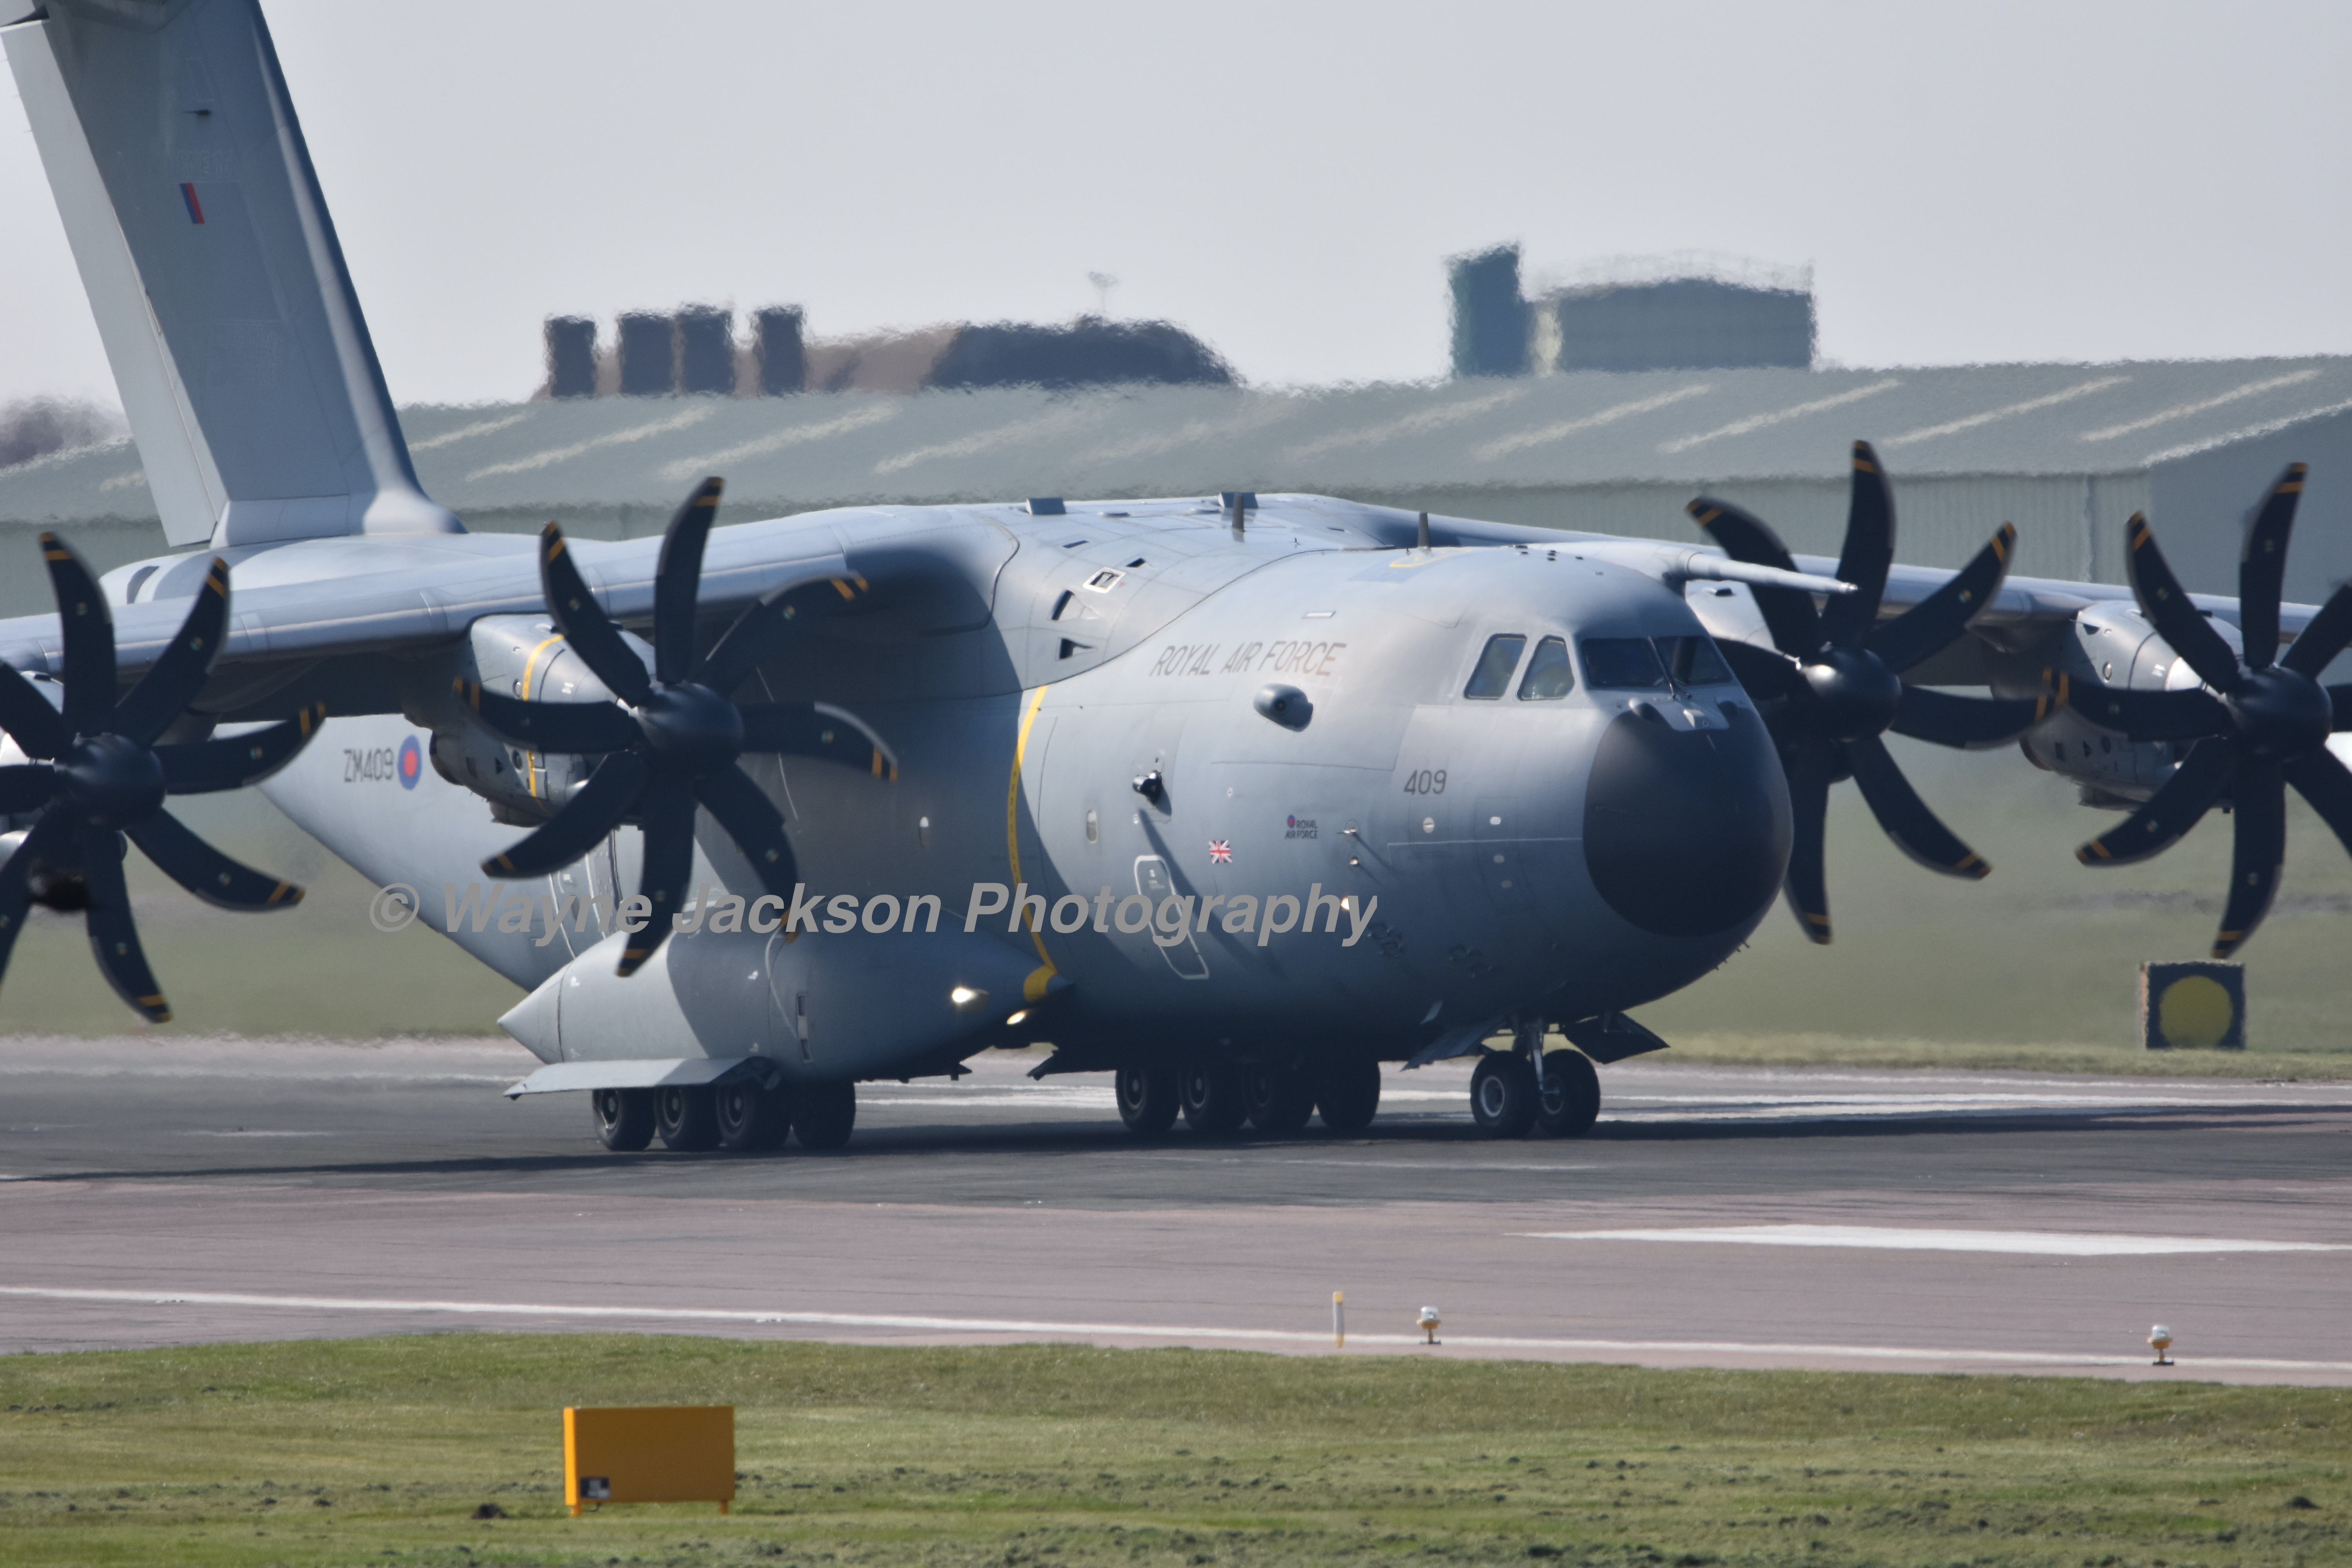 An RAF Atlas C.1 A400 going down the runway at Royal Air Force Brize Norton, Carterton, Oxfordshire